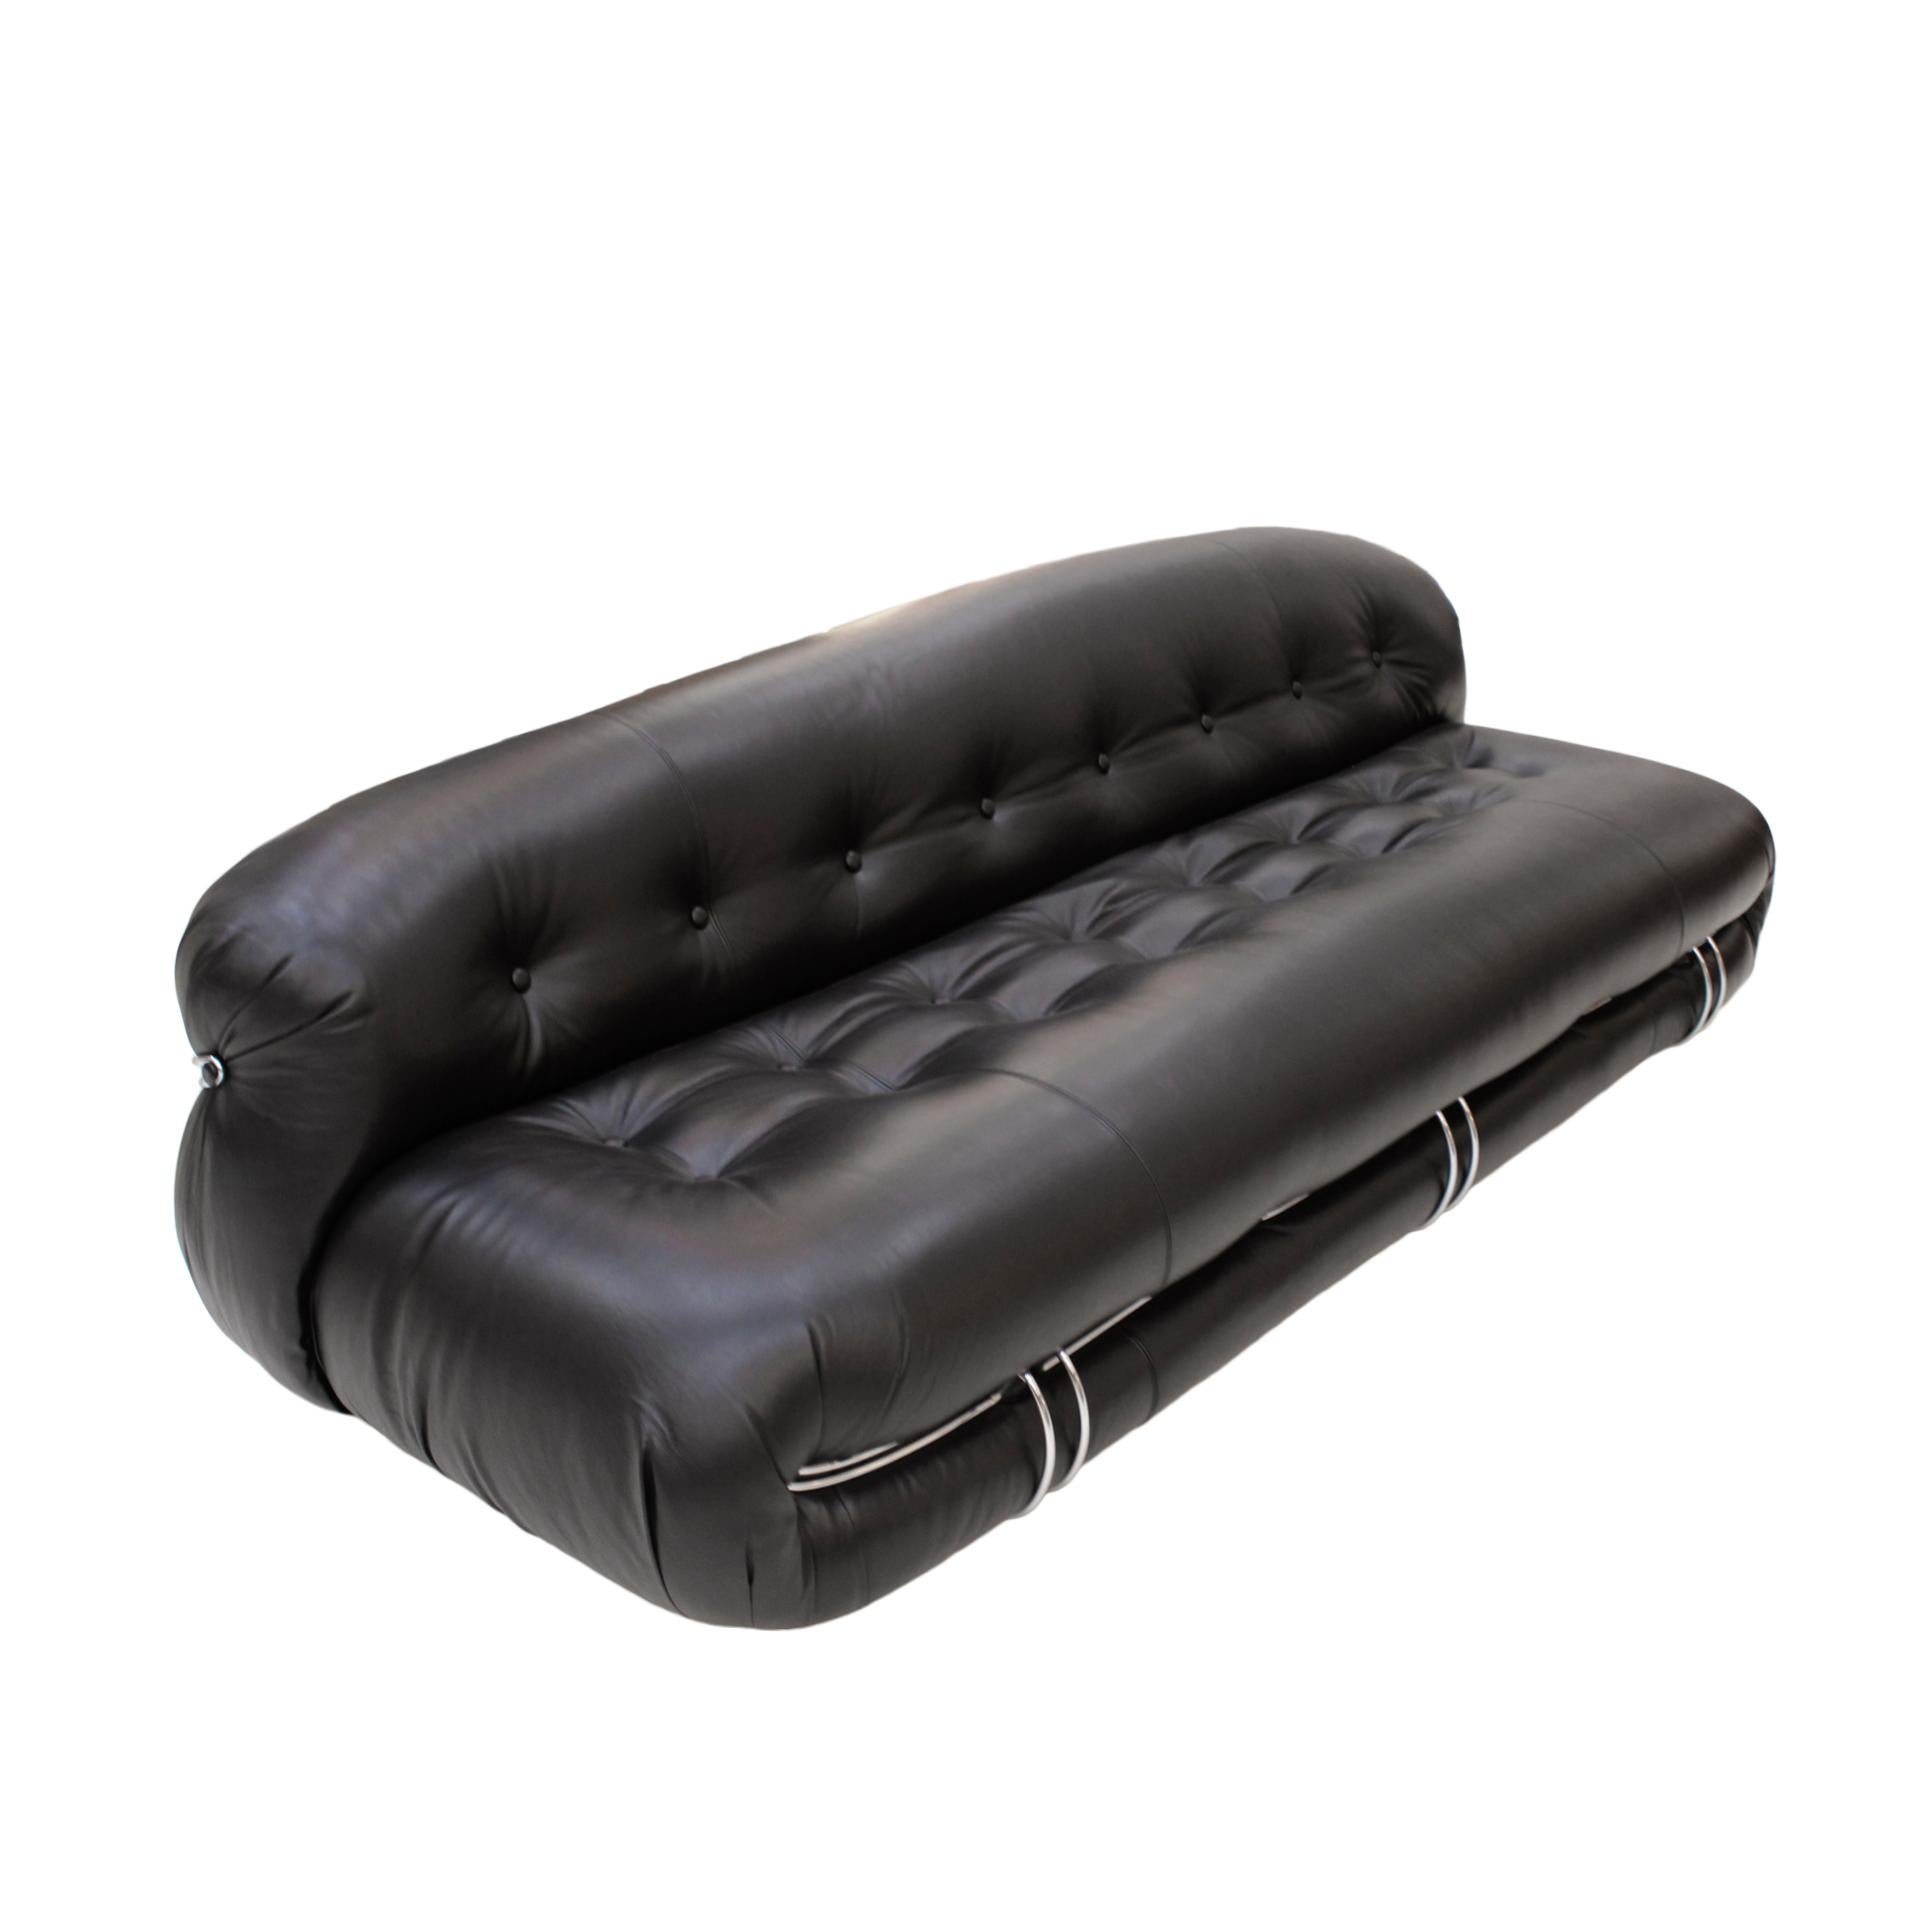 The Soriana sofa, designed by Tobia Scarpa and edited by Cassina, is a remarkable piece of furniture that embodies the essence of Italian design from the 1960s. With its sleek steel structure and reupholstered black leather, this sofa effortlessly